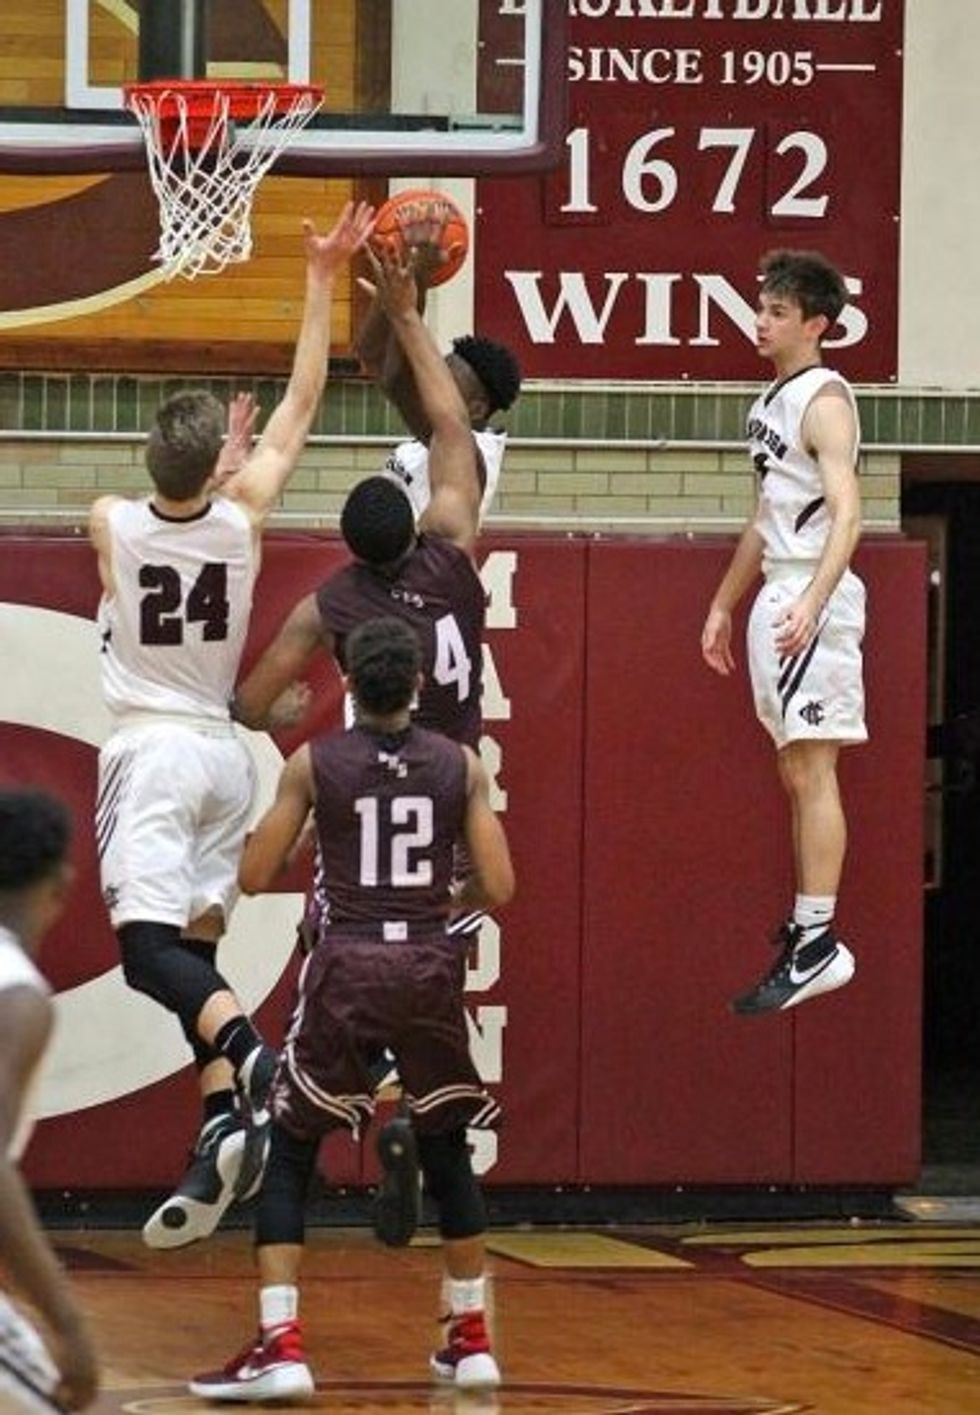 See the Viral Photo of a High School Basketball Player 'Levitating’ During a Game